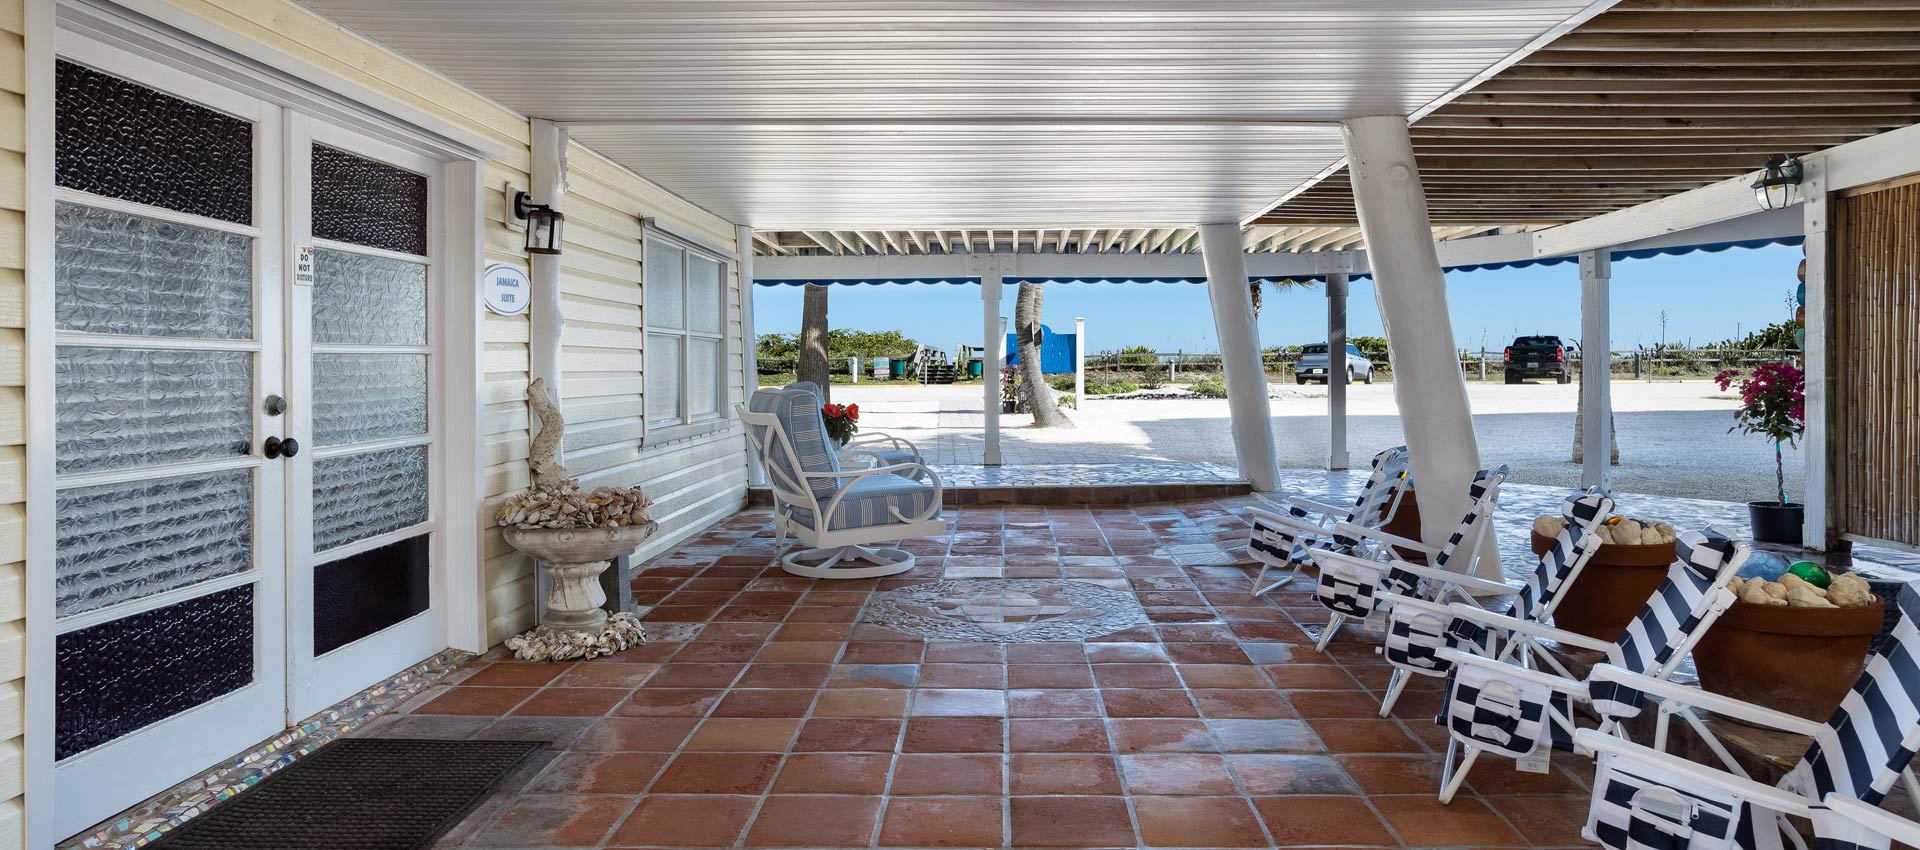 the Jamaica Suite Outdoor patio with beach view